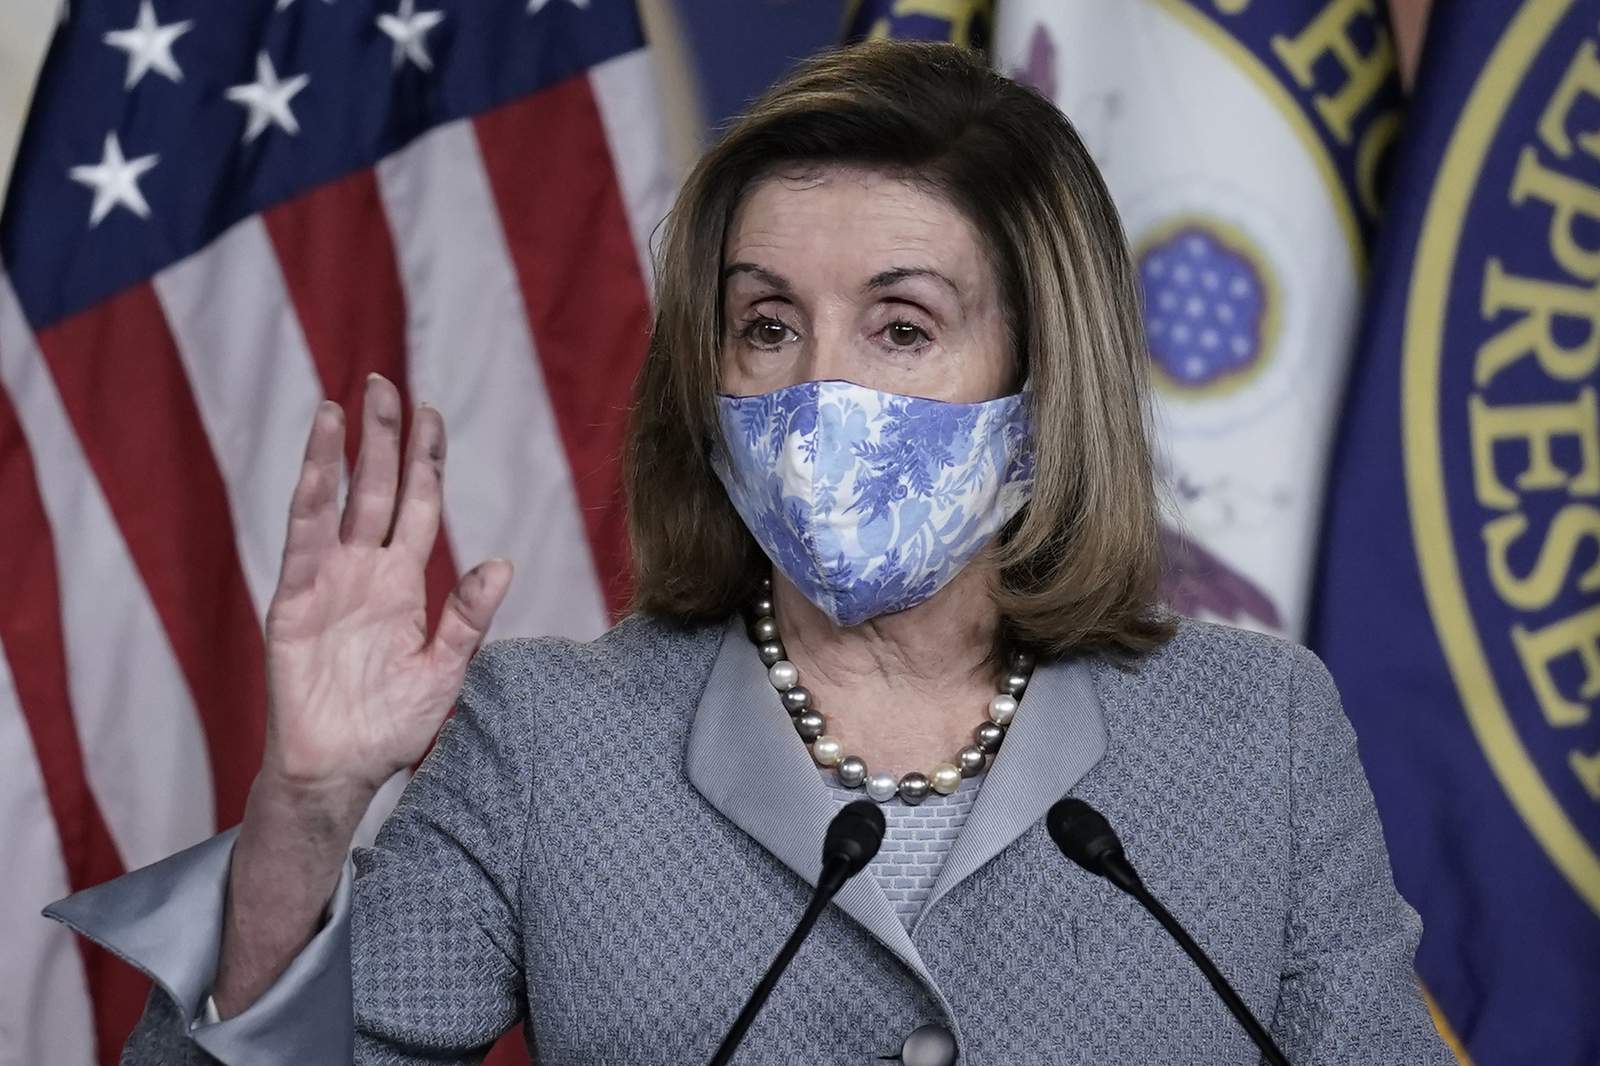 Pelosi wants 'big' health care, infrastructure push in 2021